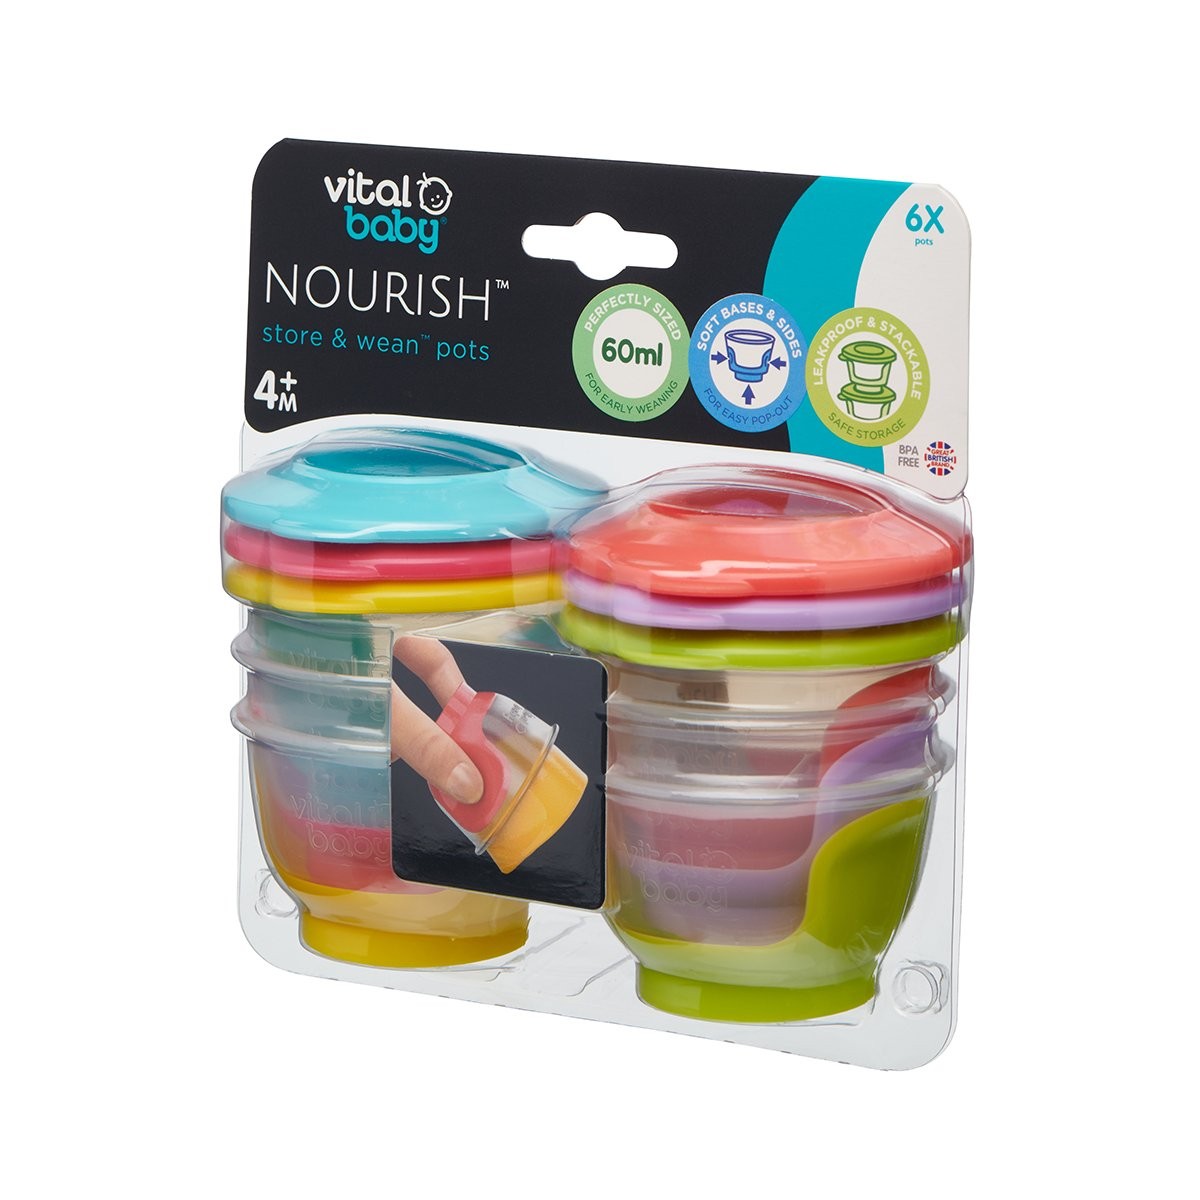 Vital Baby Nourish Store and Wean Pots 60ml 6pack - 287667